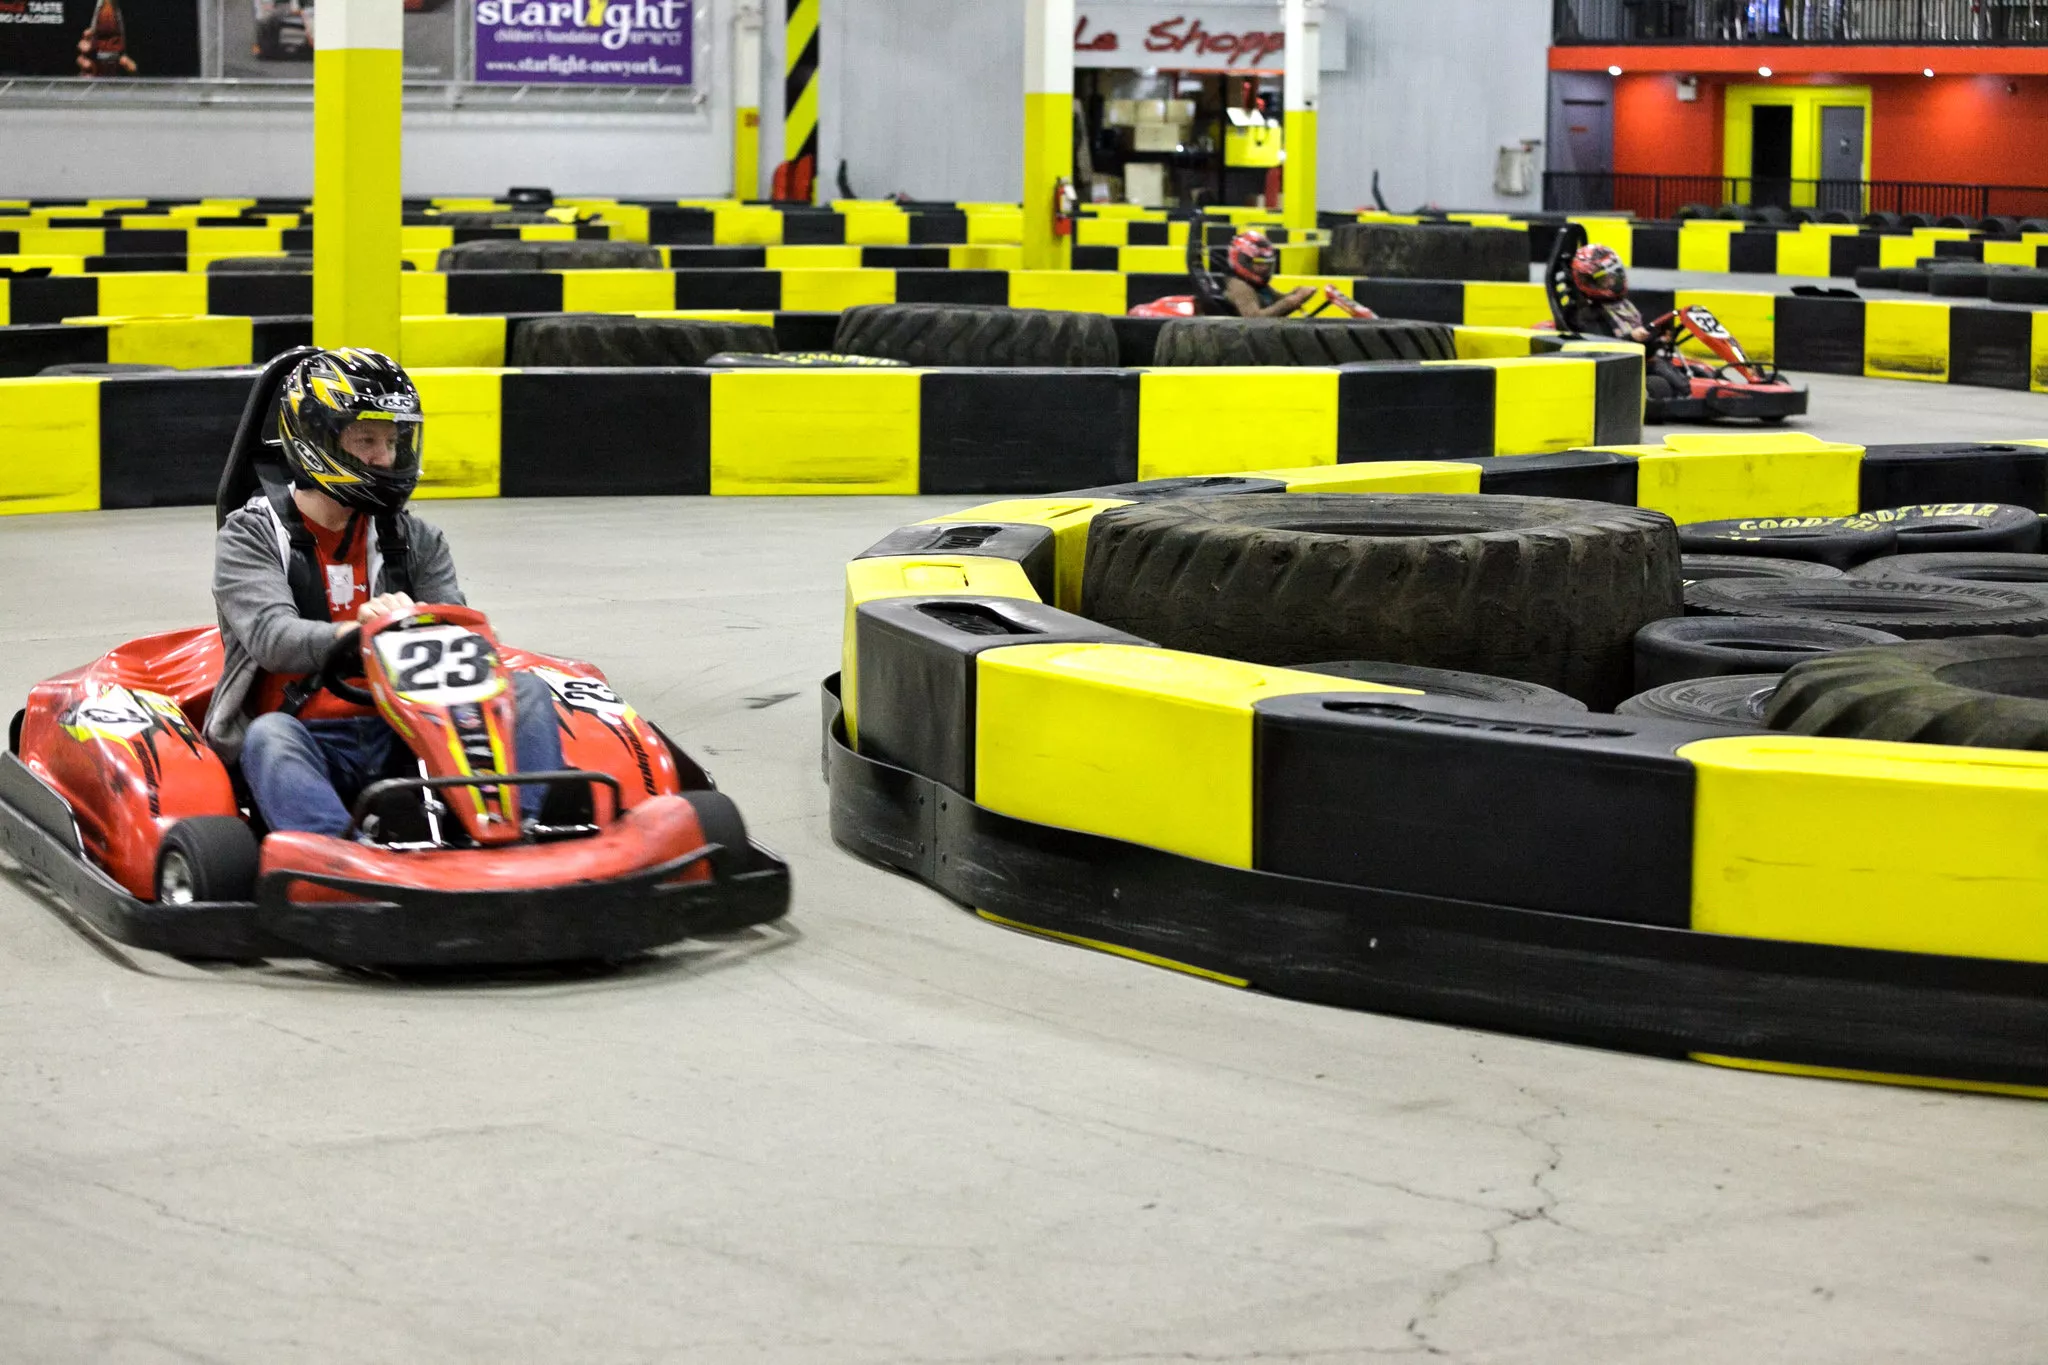 TBC Indoor Racing in Canada, North America | Karting - Rated 3.8